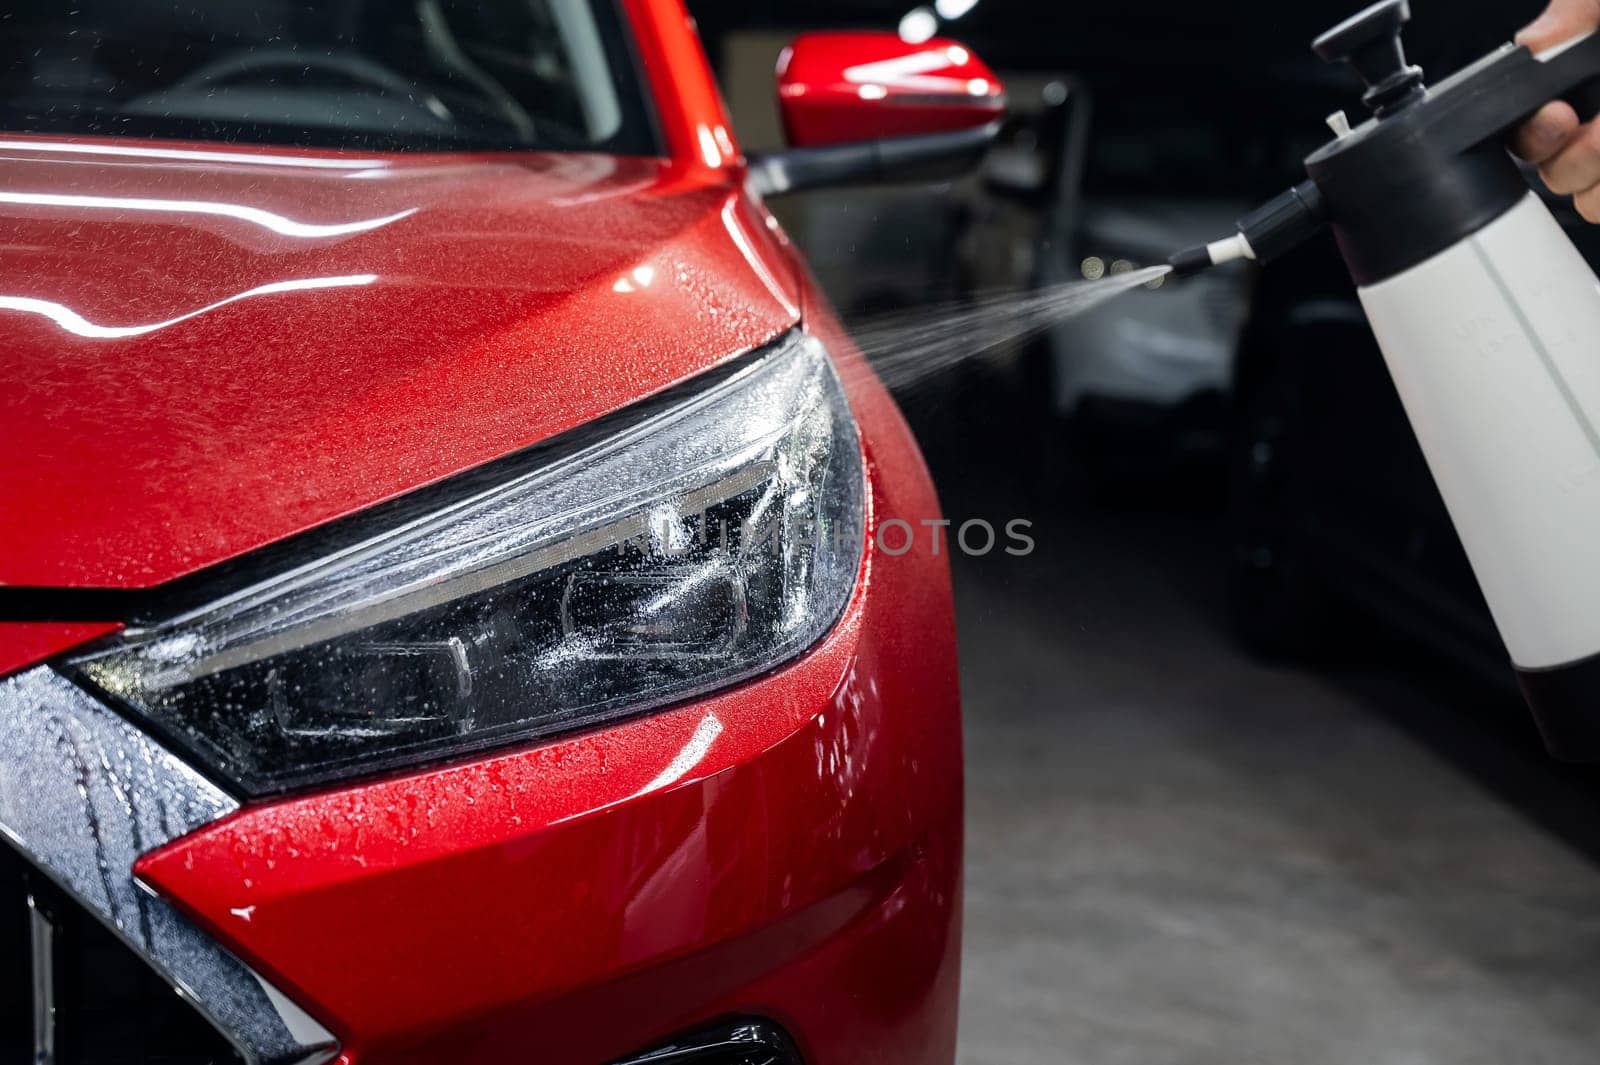 A man washes the headlights of a red car with a spray